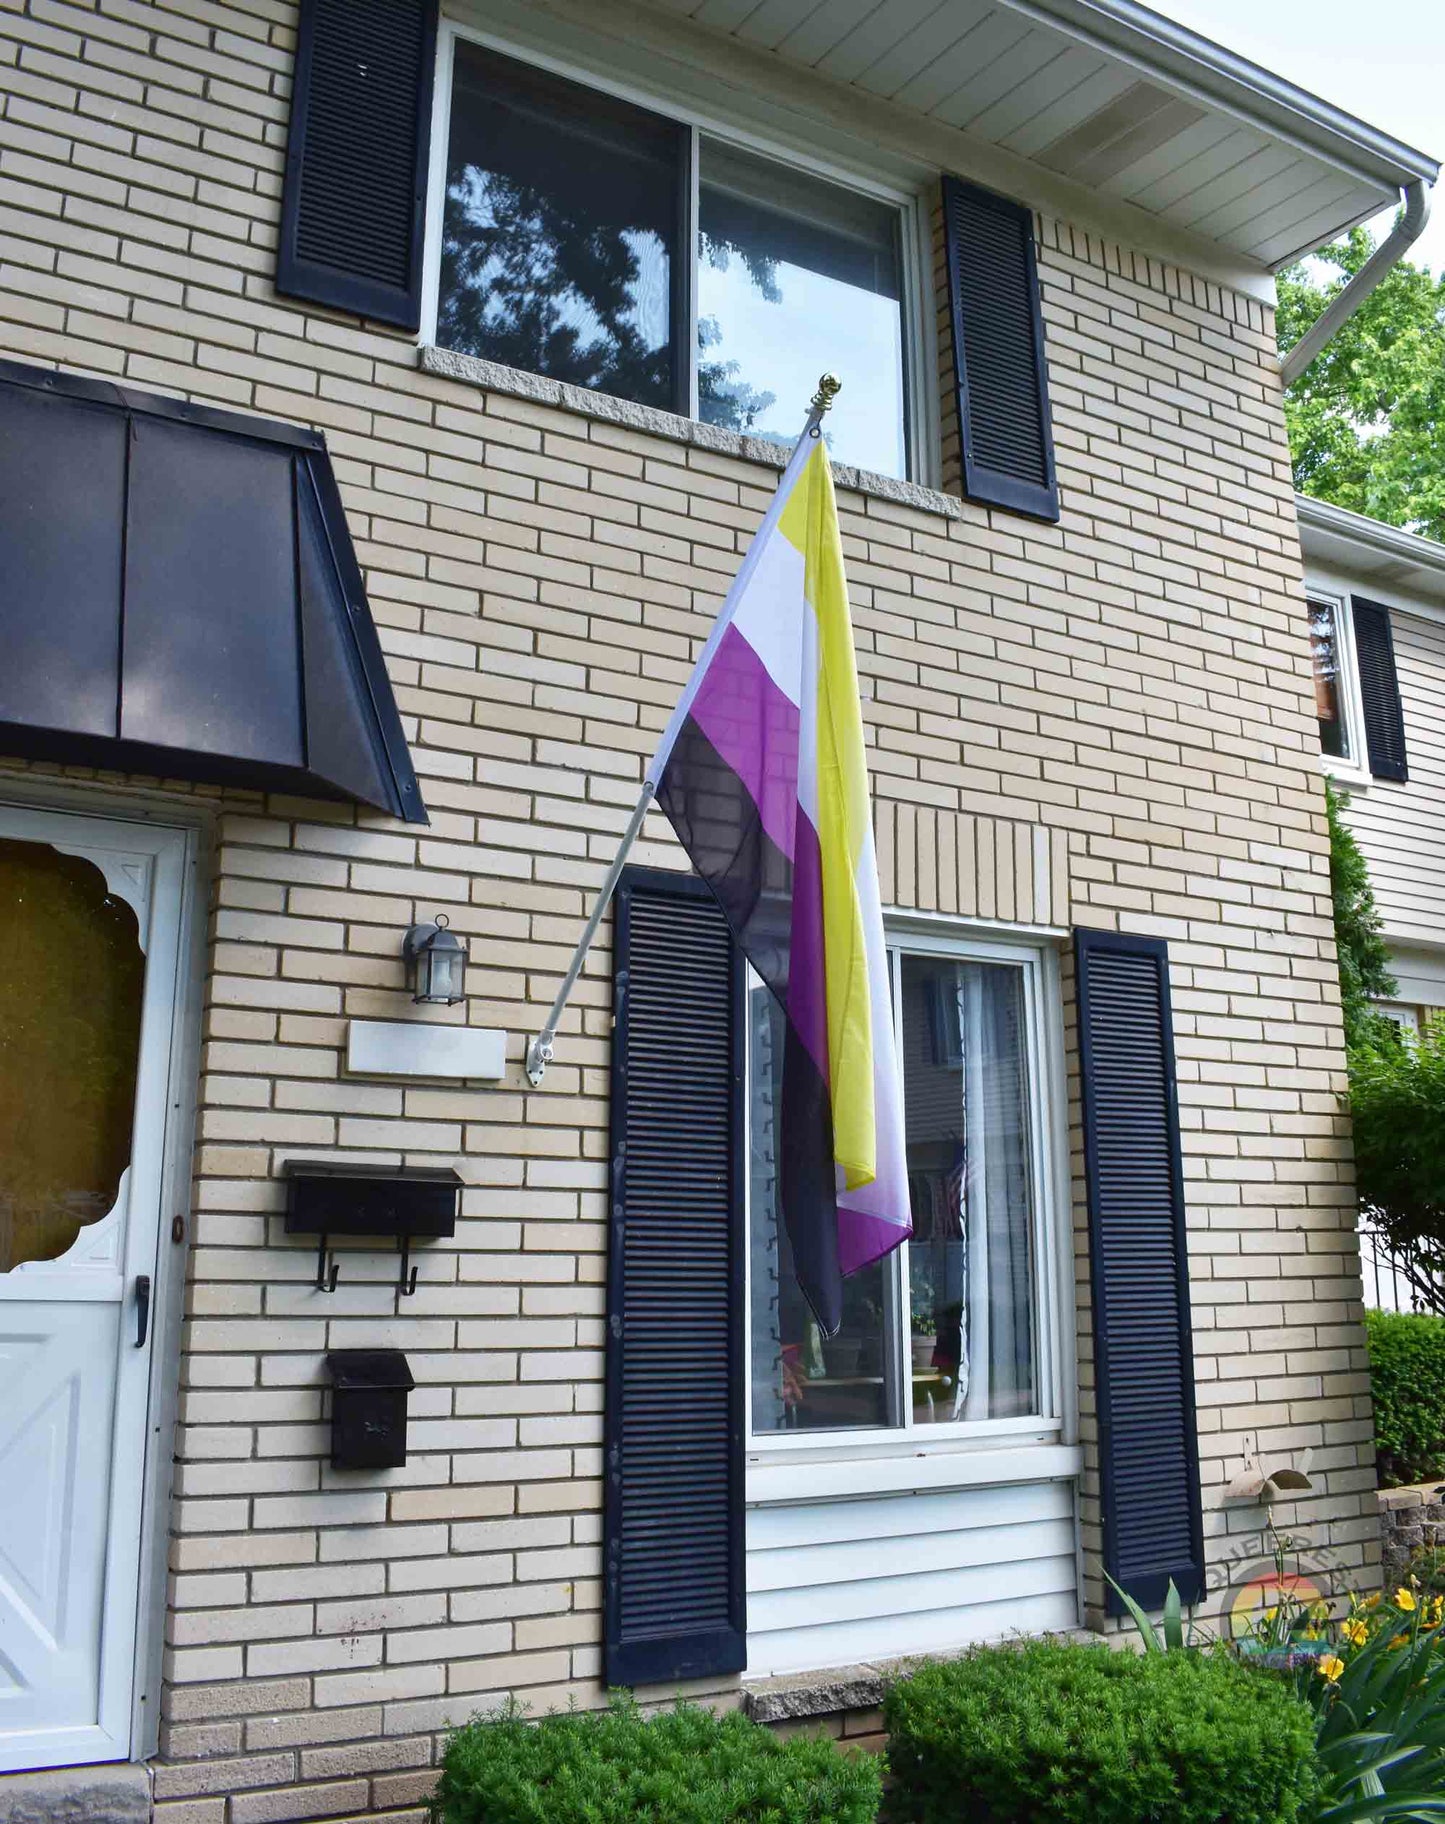 3’x5’ nonbinary pride flag hanging from a flagpole on the outside of a light brick house with dark shutters